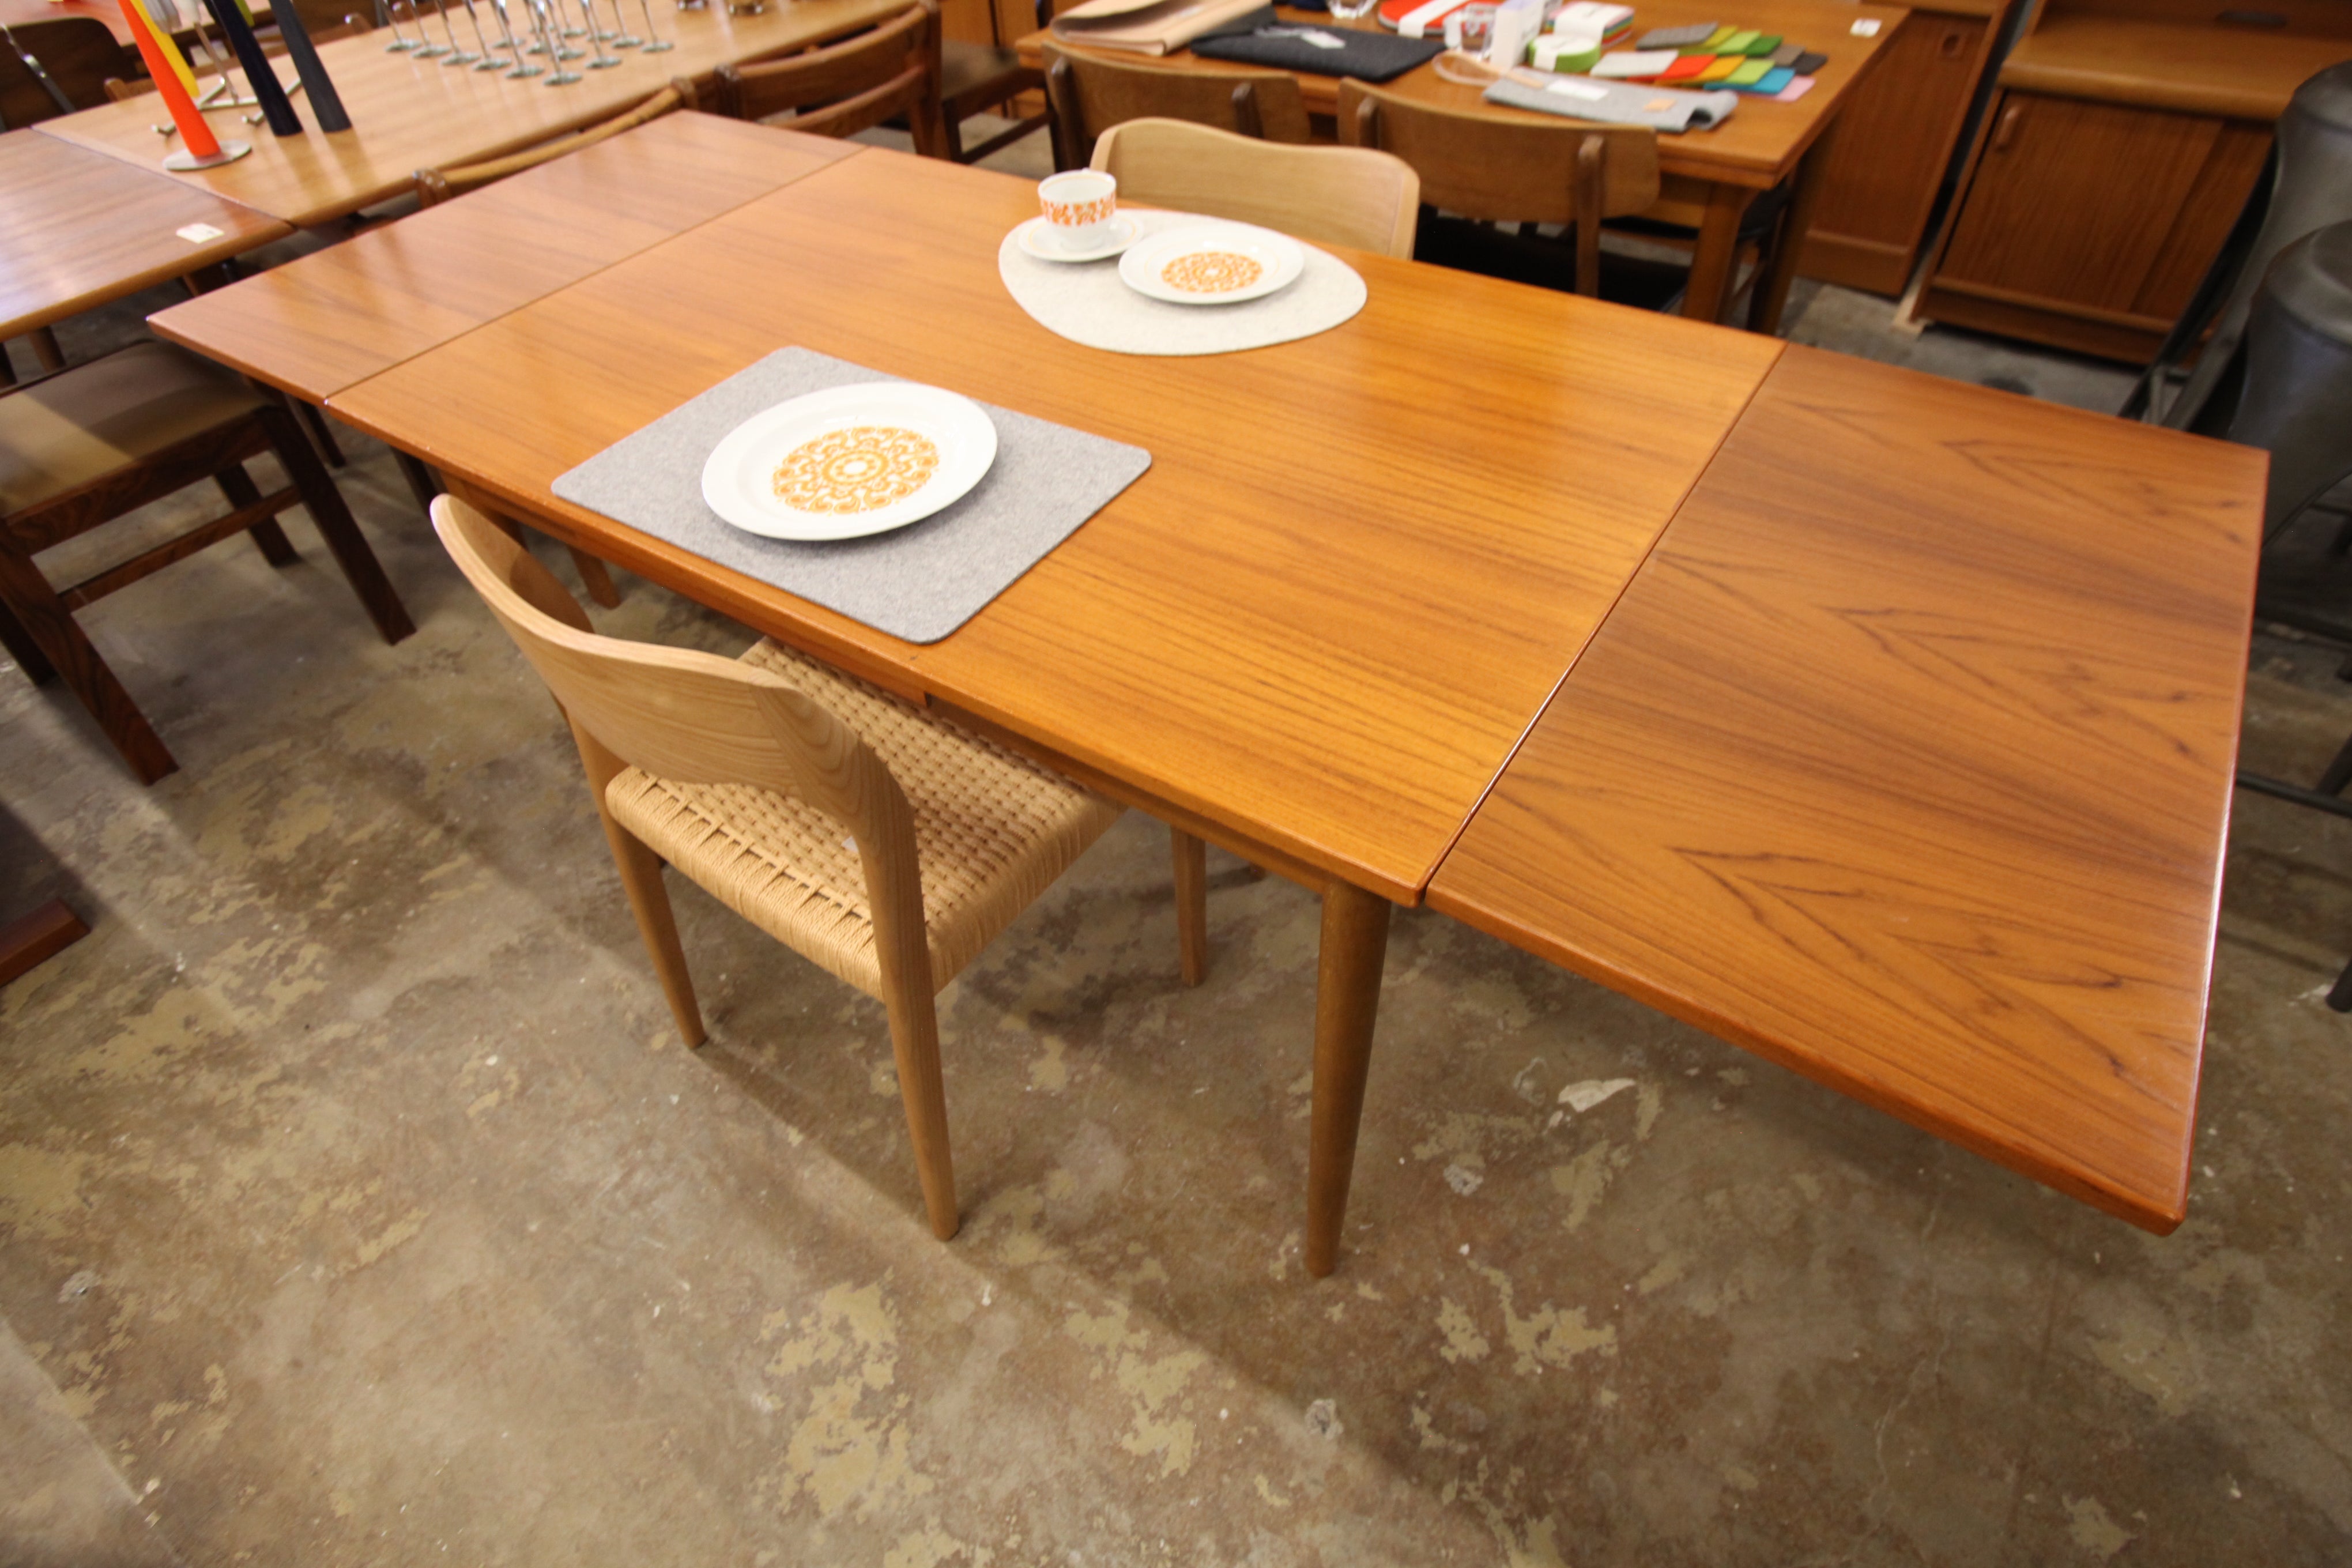 Vintage Danish Teak Extension Dining Table by Farstrup (48"x32") (79.25"x32") 29"H